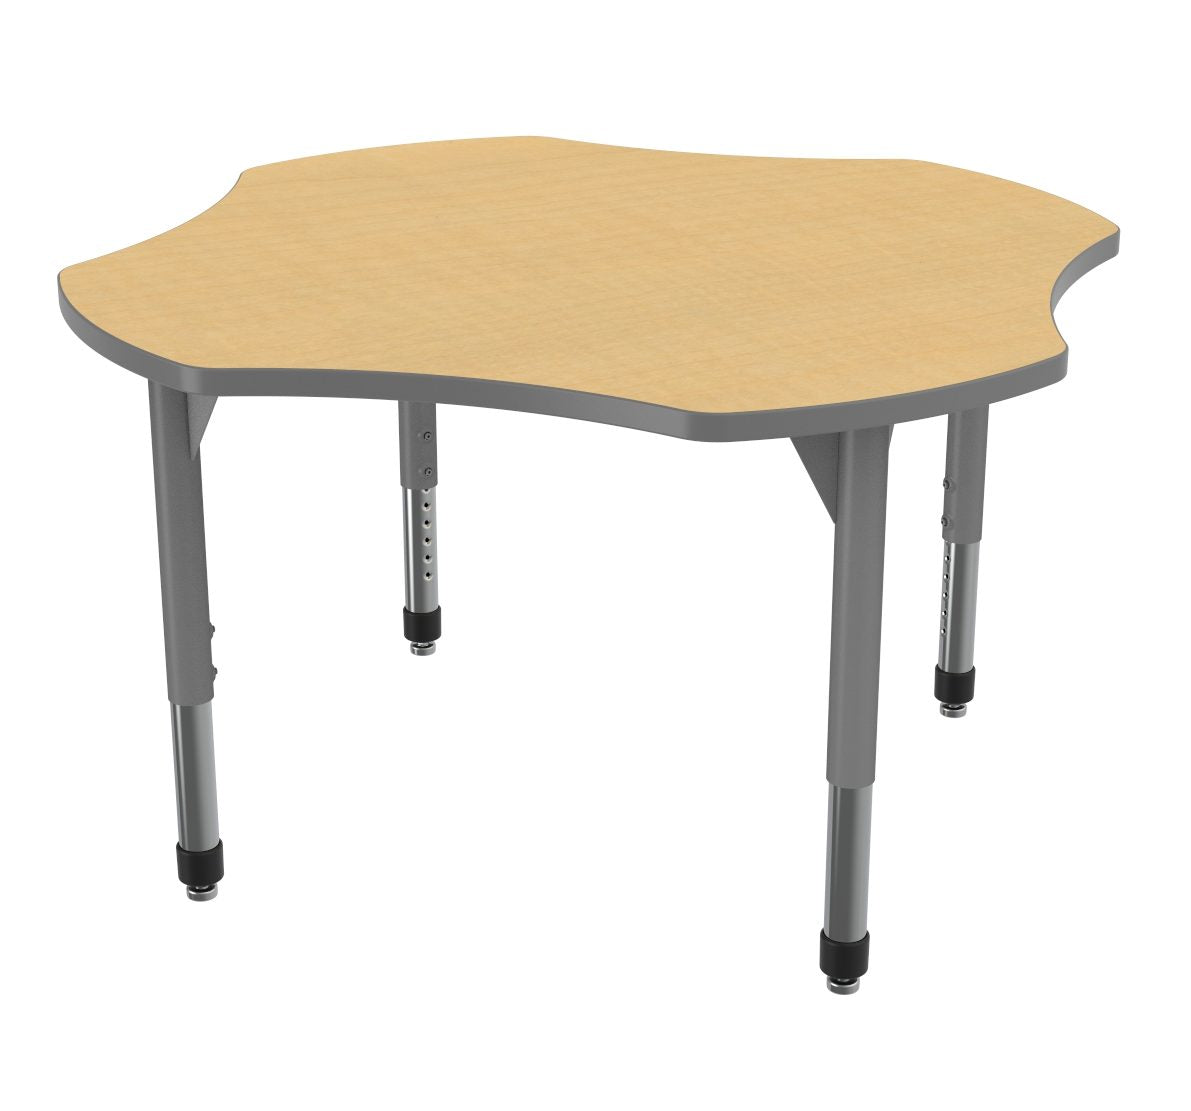 Marco Premier Series 48" Clover Activity Table Adjustable Height 21"-31" (43-2265-MB)